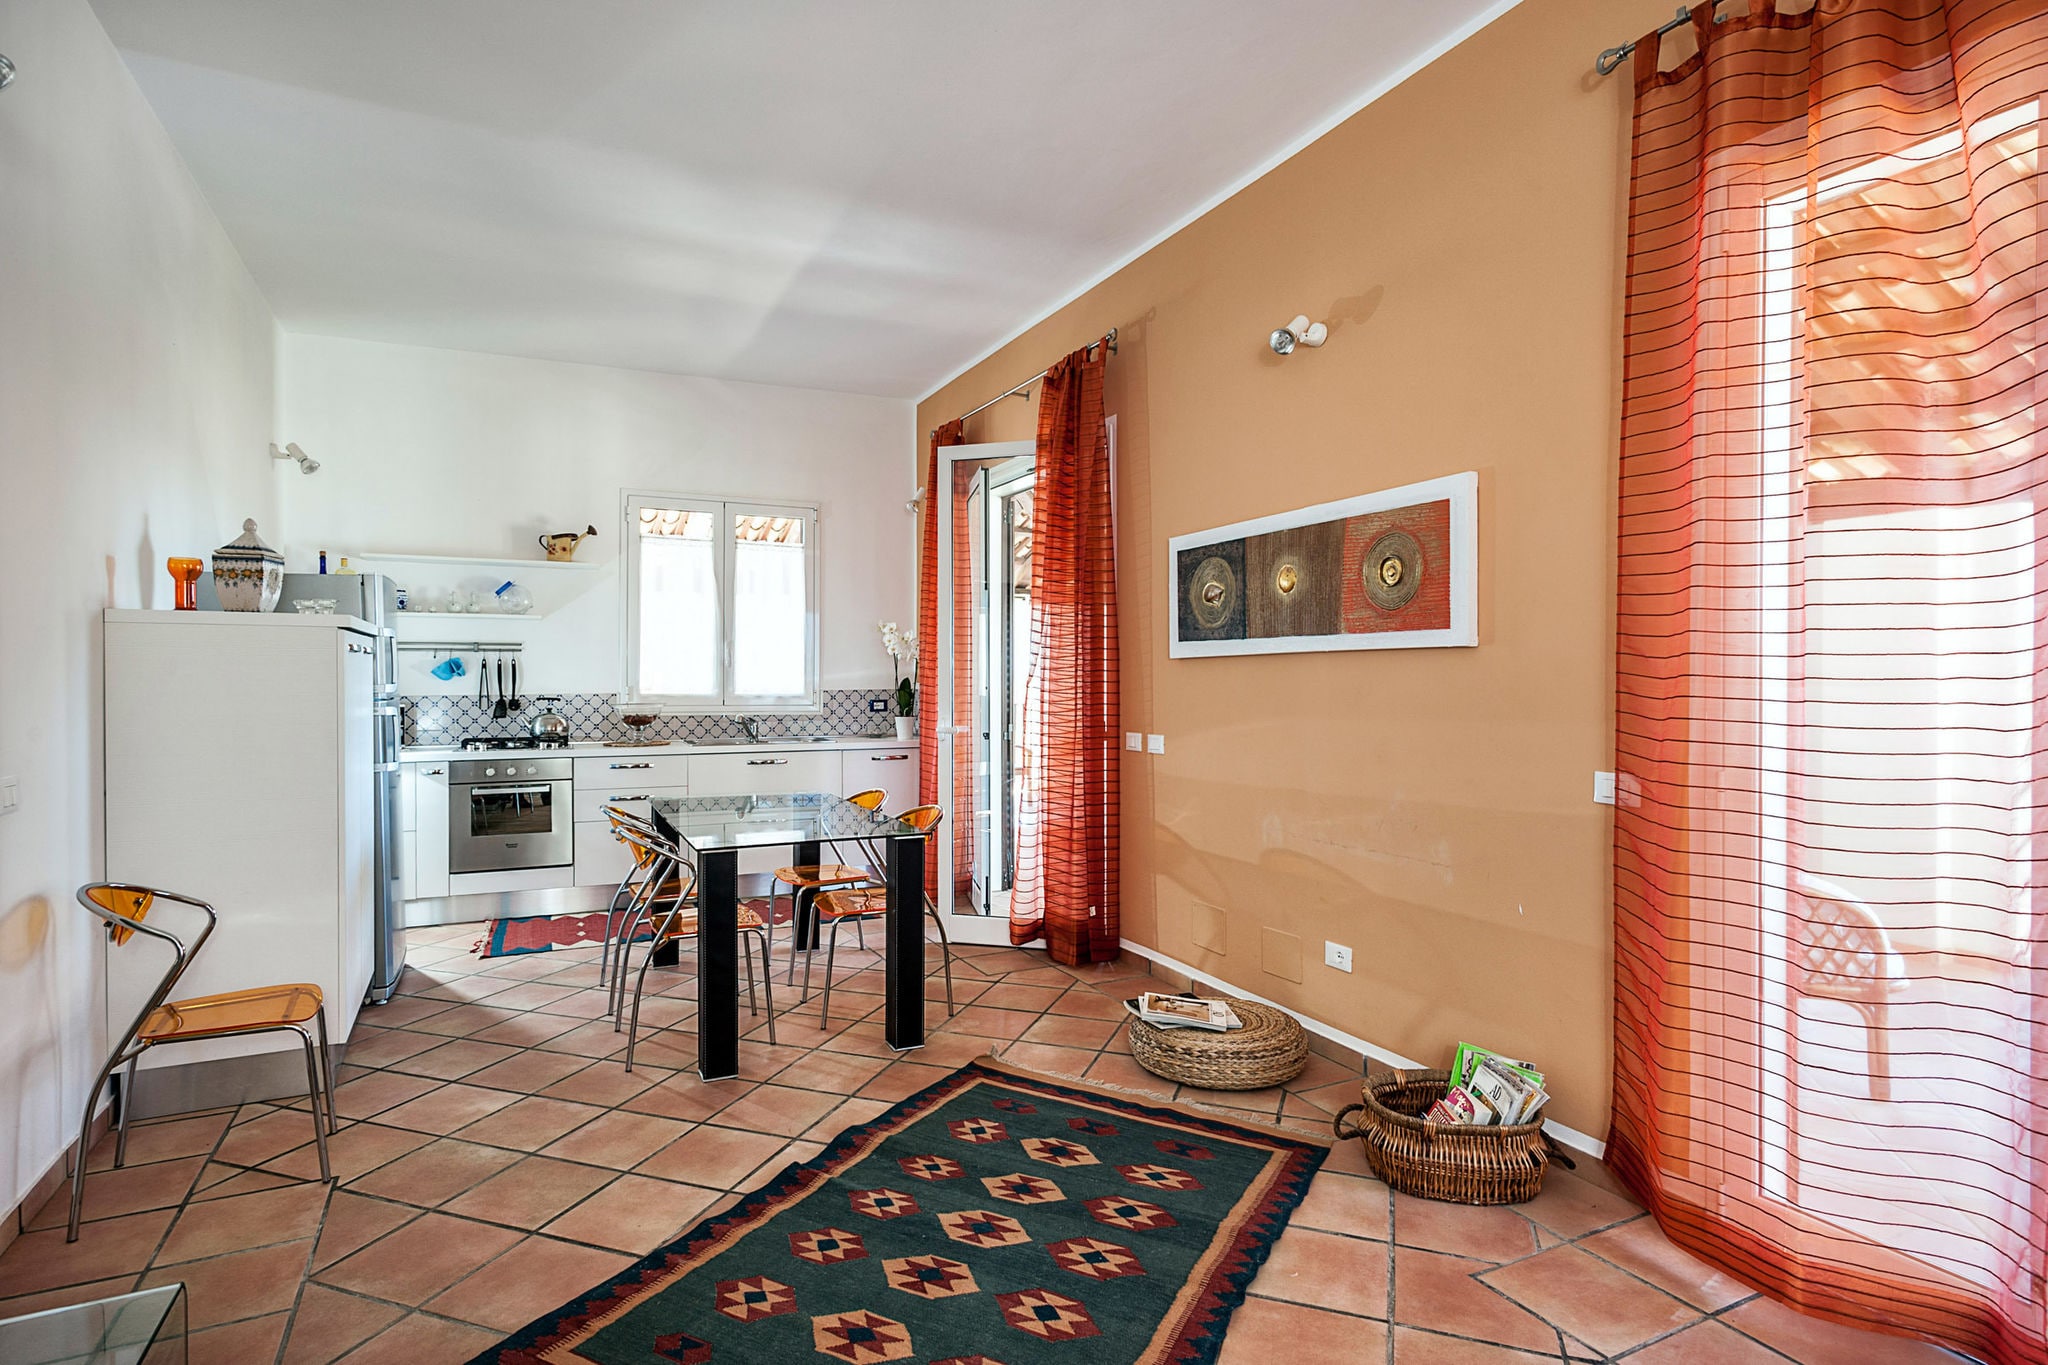 Elegant flat in villa with pool and garden, just a few kilometres from the sea!